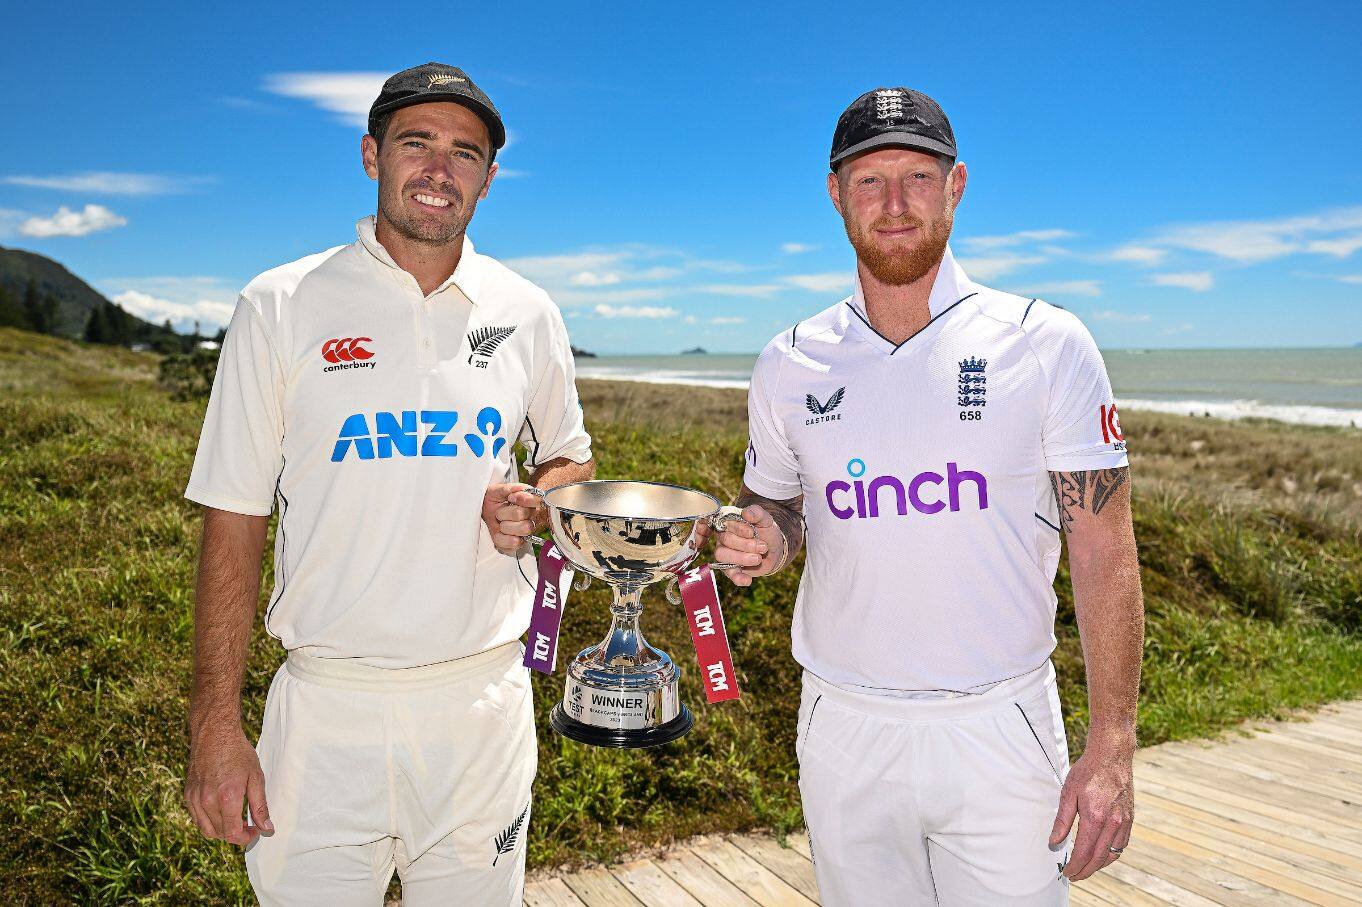 NZ vs ENG, 1st Test: Match Preview, Probable XI, Live Streaming, Fantasy Tips